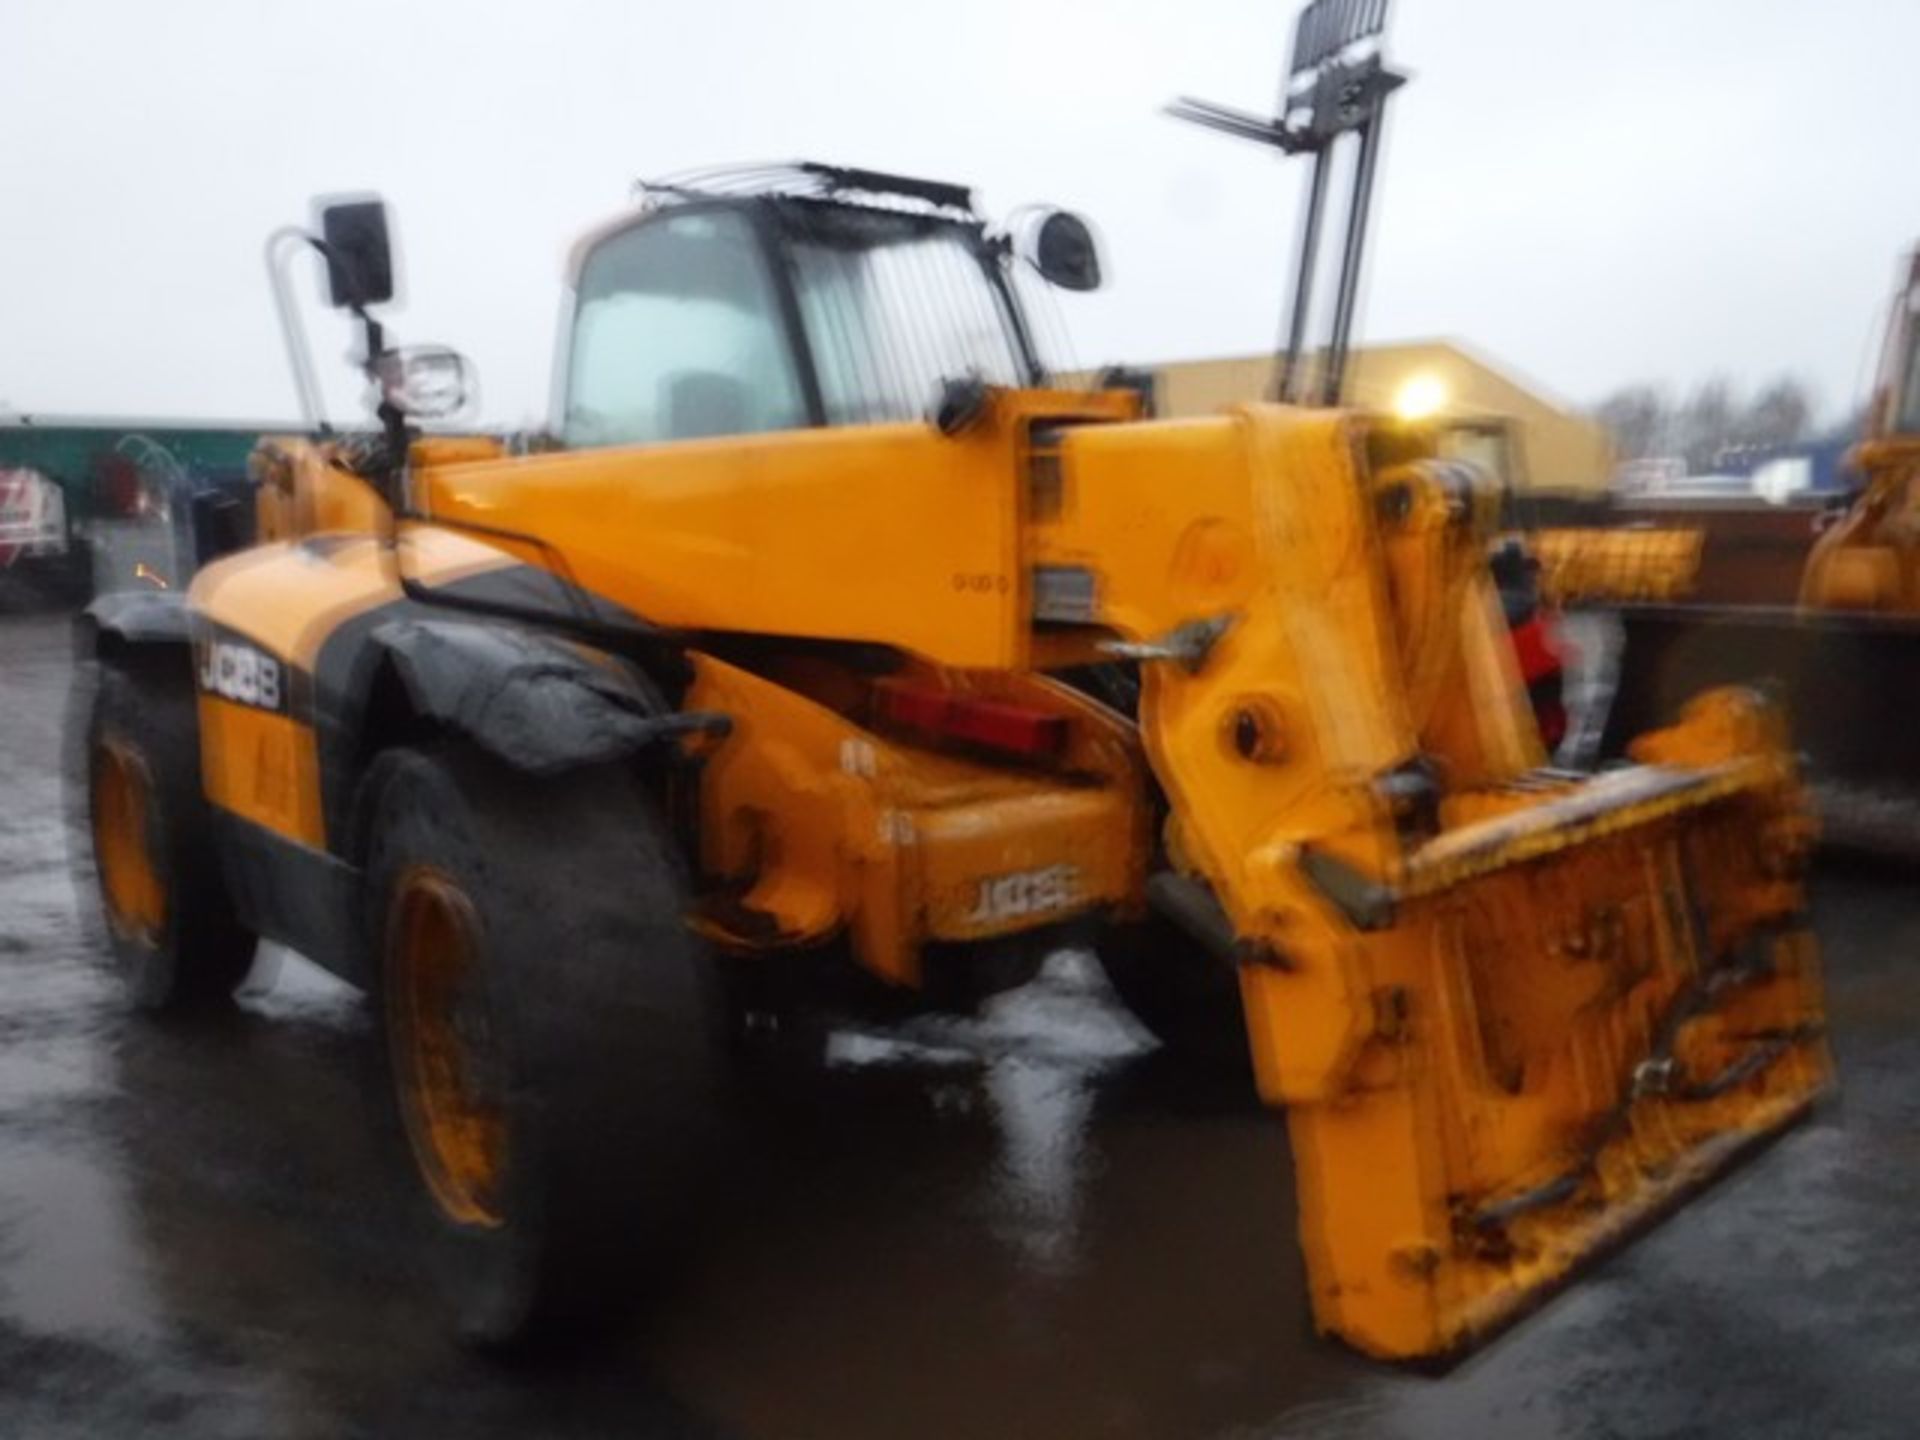 2012 JCB 550 - 80 WASTE SPECIAL TELESCOPIC HANDLER, 8870hrs (NOT VERIFIED) ON SOLID TYRES - Image 4 of 13